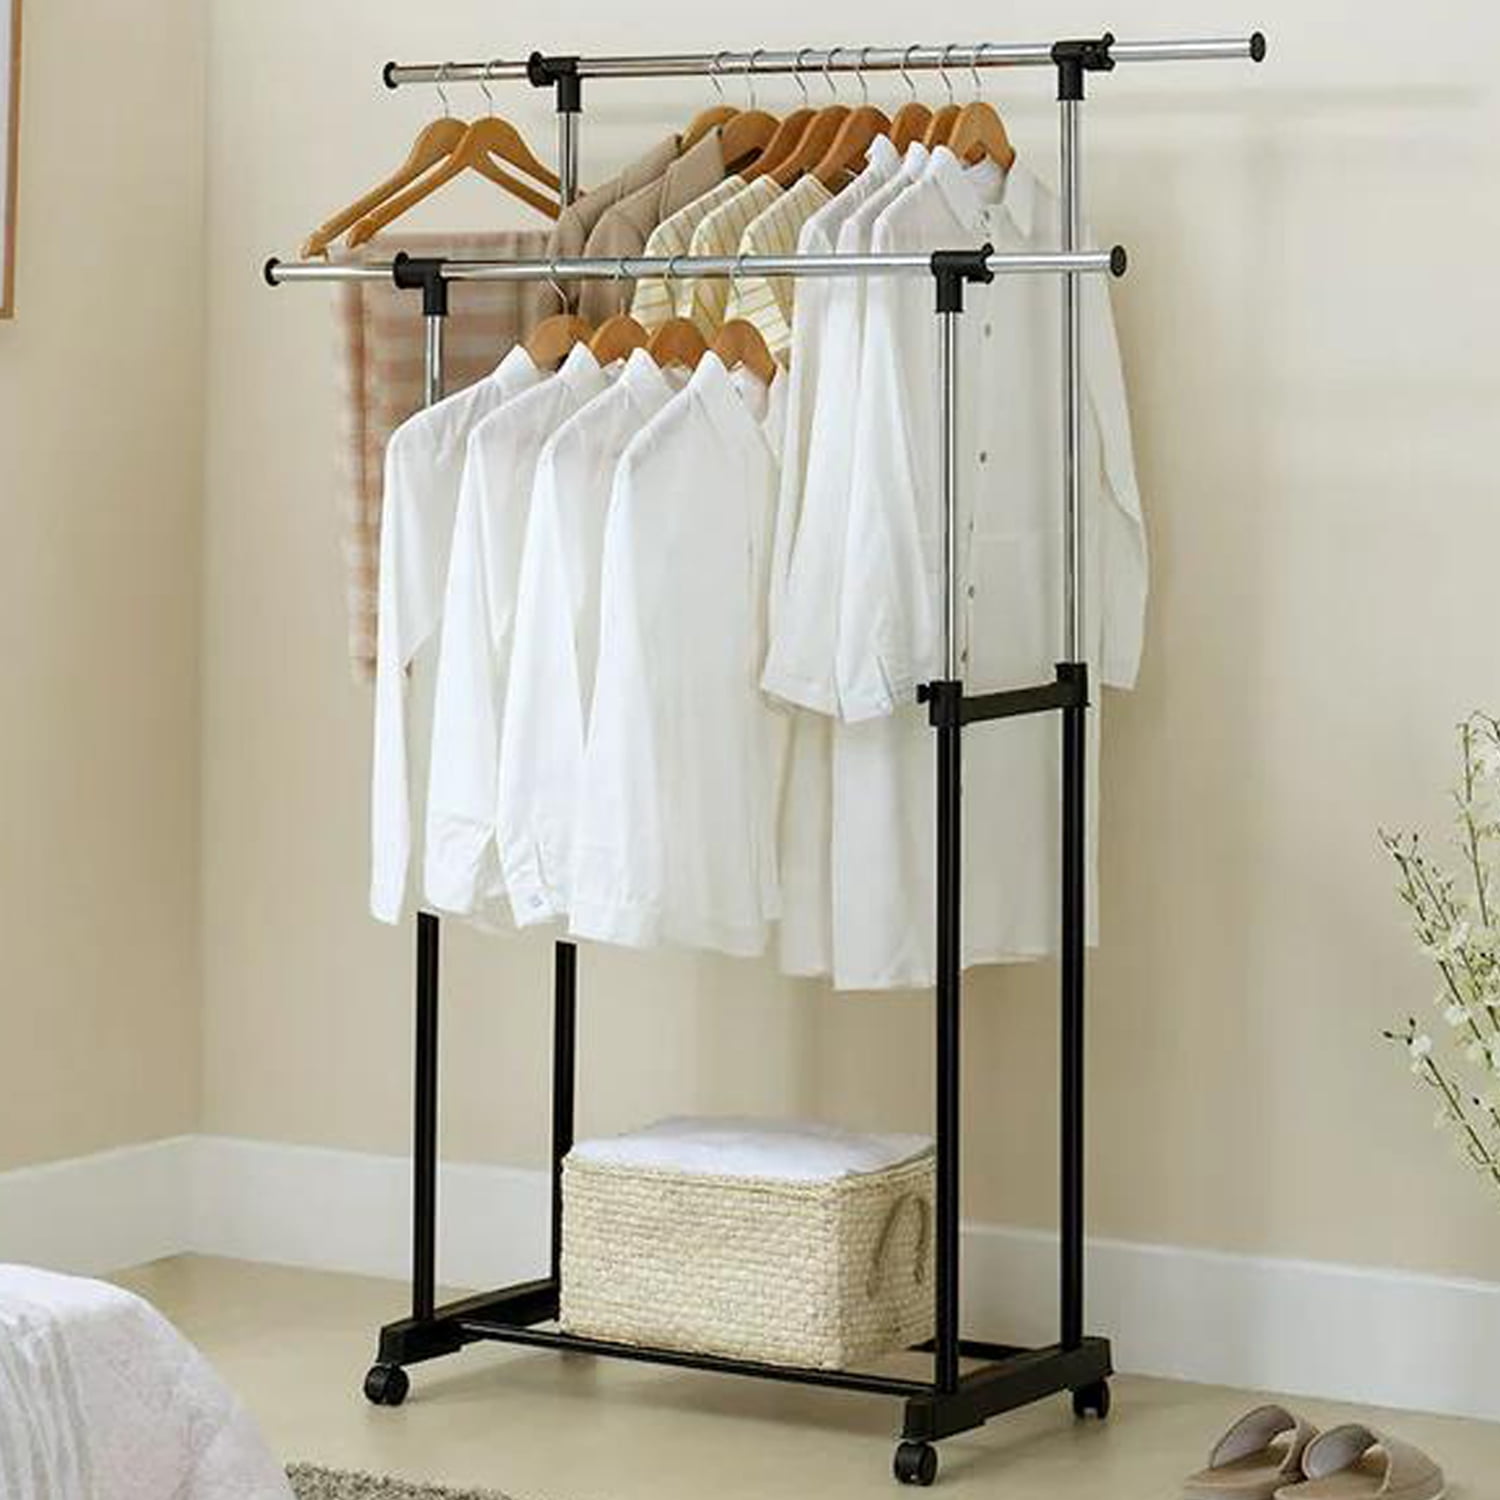 Mivnue Clothes Rack Clothing Drying Rack, Rolling Garment Rack for Hanging  Clothes, Small Metal Pipe Stand Coat Racks on Wheels with 2 Tier Shelves